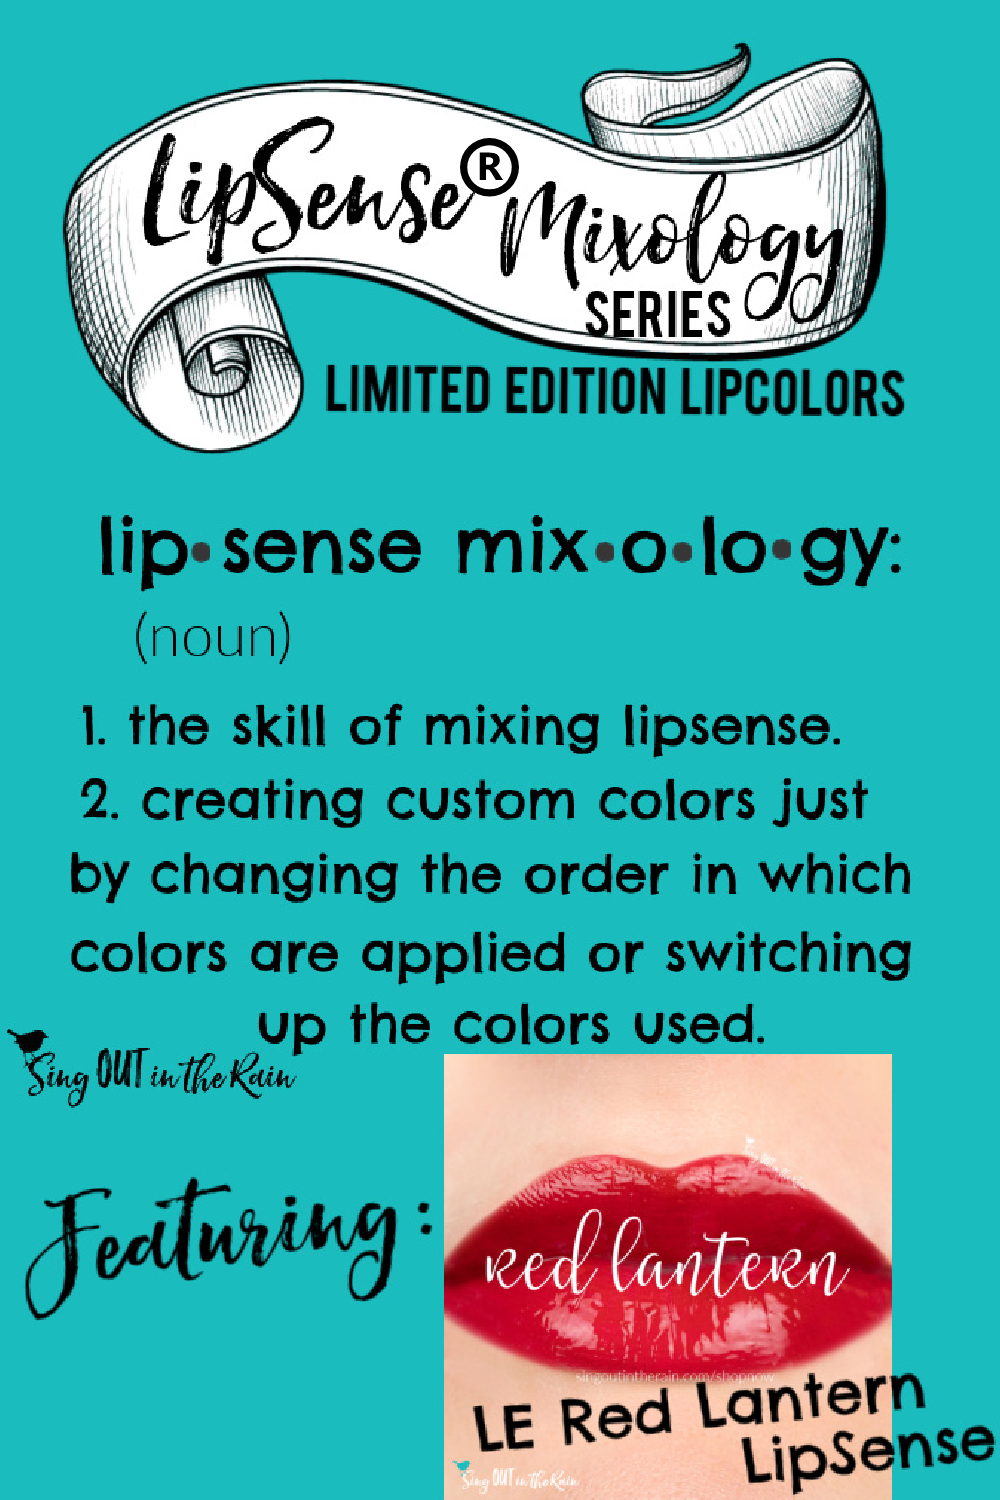 The Ultimate Guide to Red Lantern LipSense Mixology